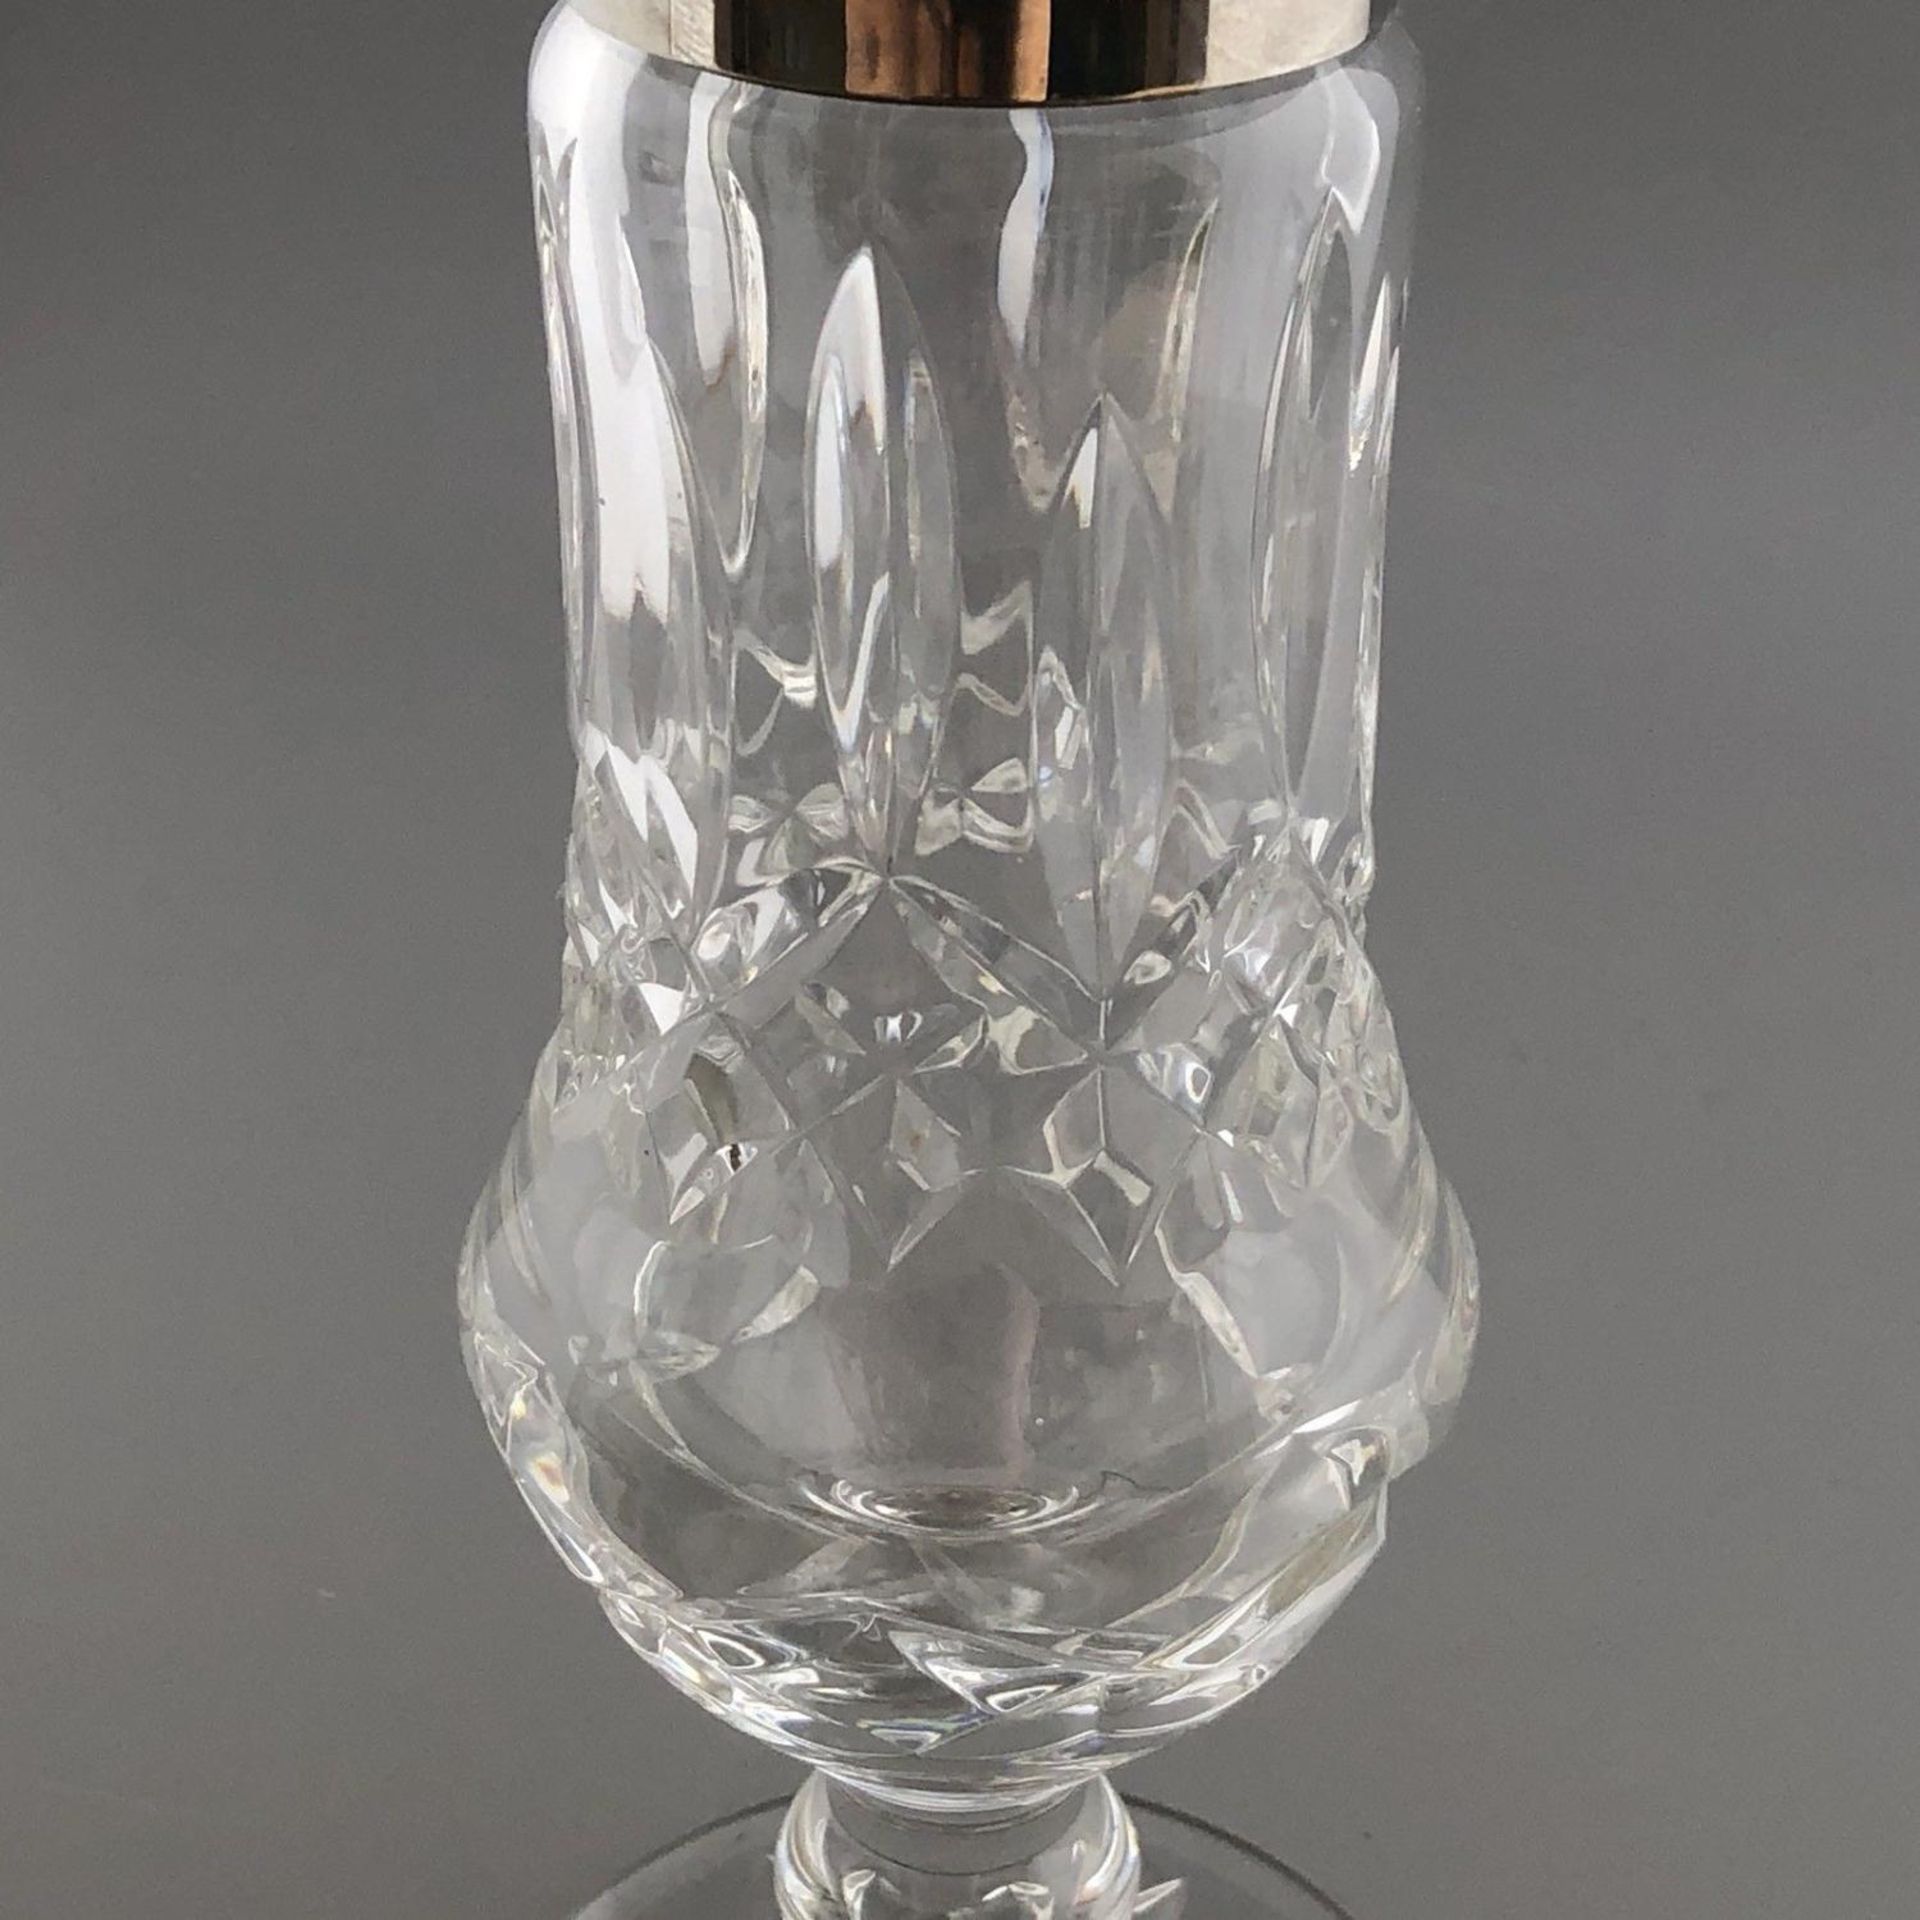 Irish Crystal - Lismore Pattern by Waterford - Large Sugar or Flour Caster - Image 4 of 7